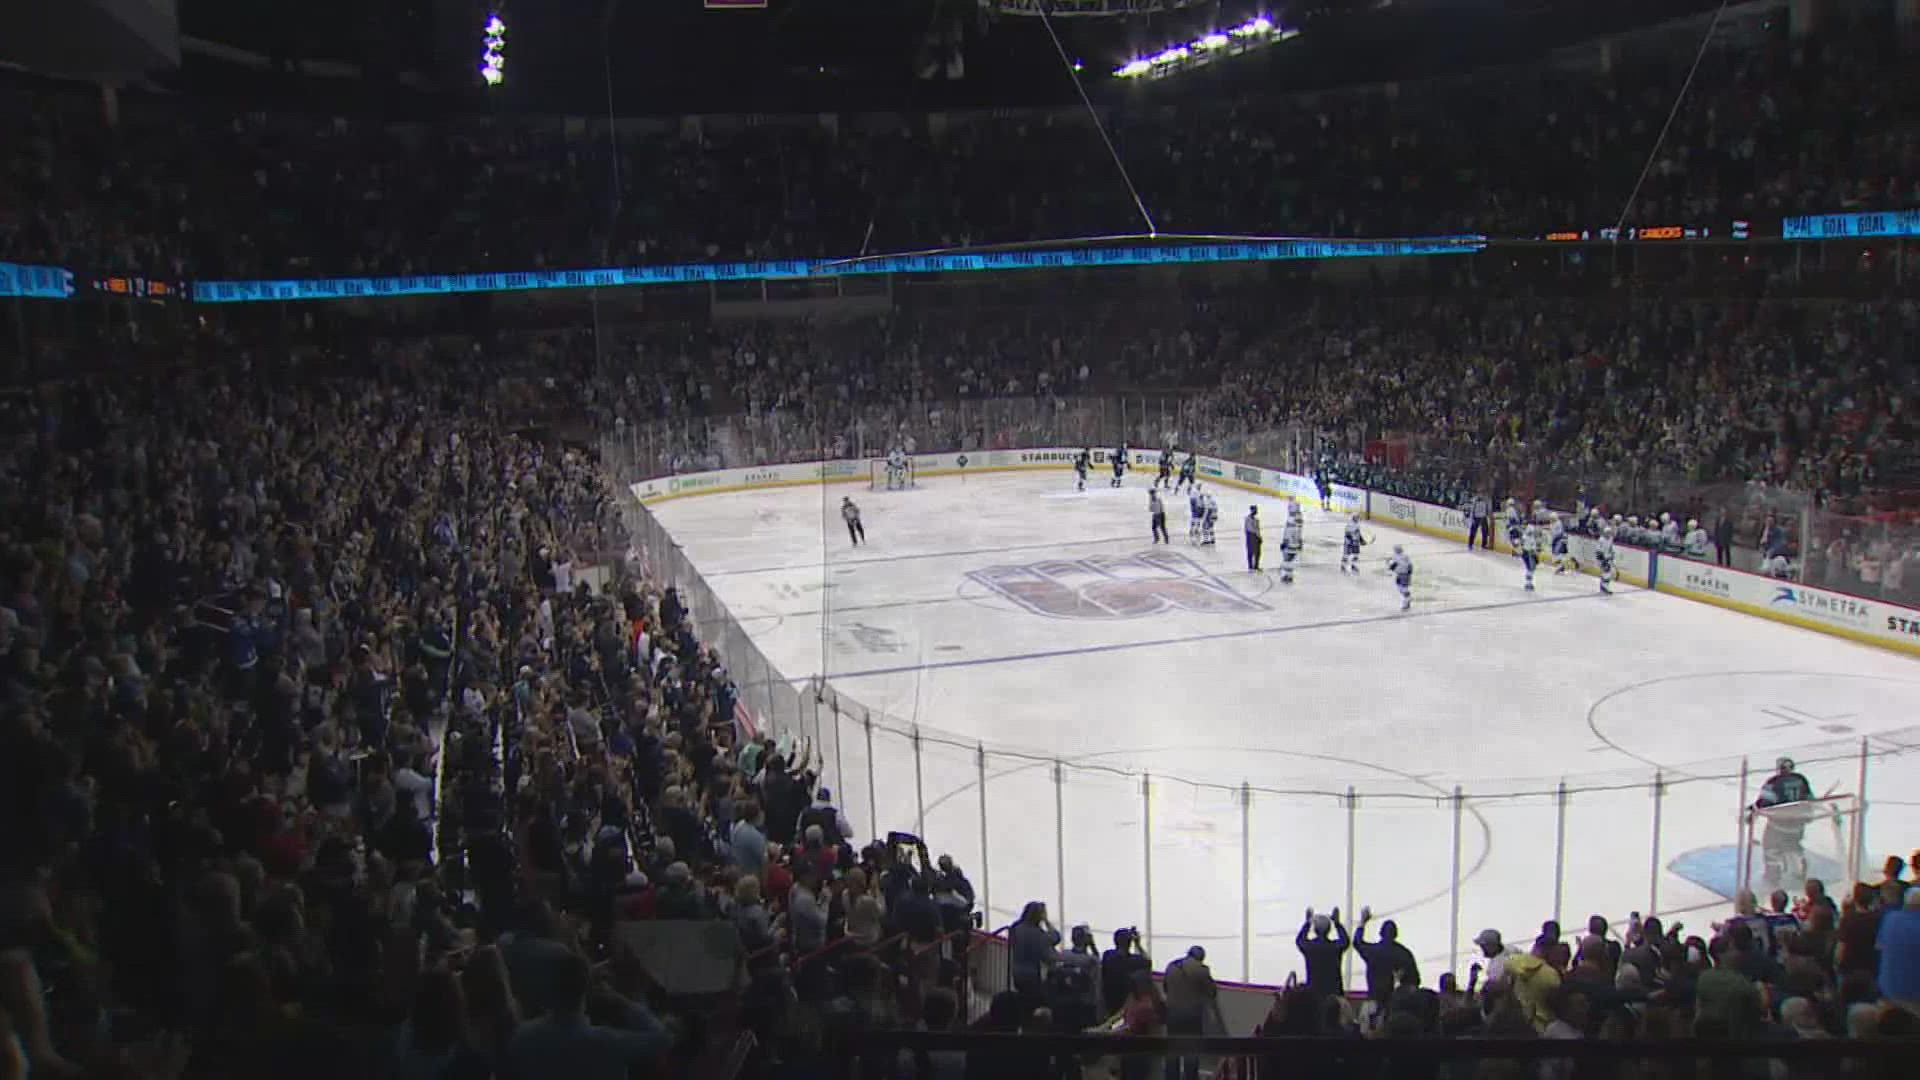 Seattle's new NHL team   successfully defeated the Vancouver Canucks in front of a sold out crowd in Spokane